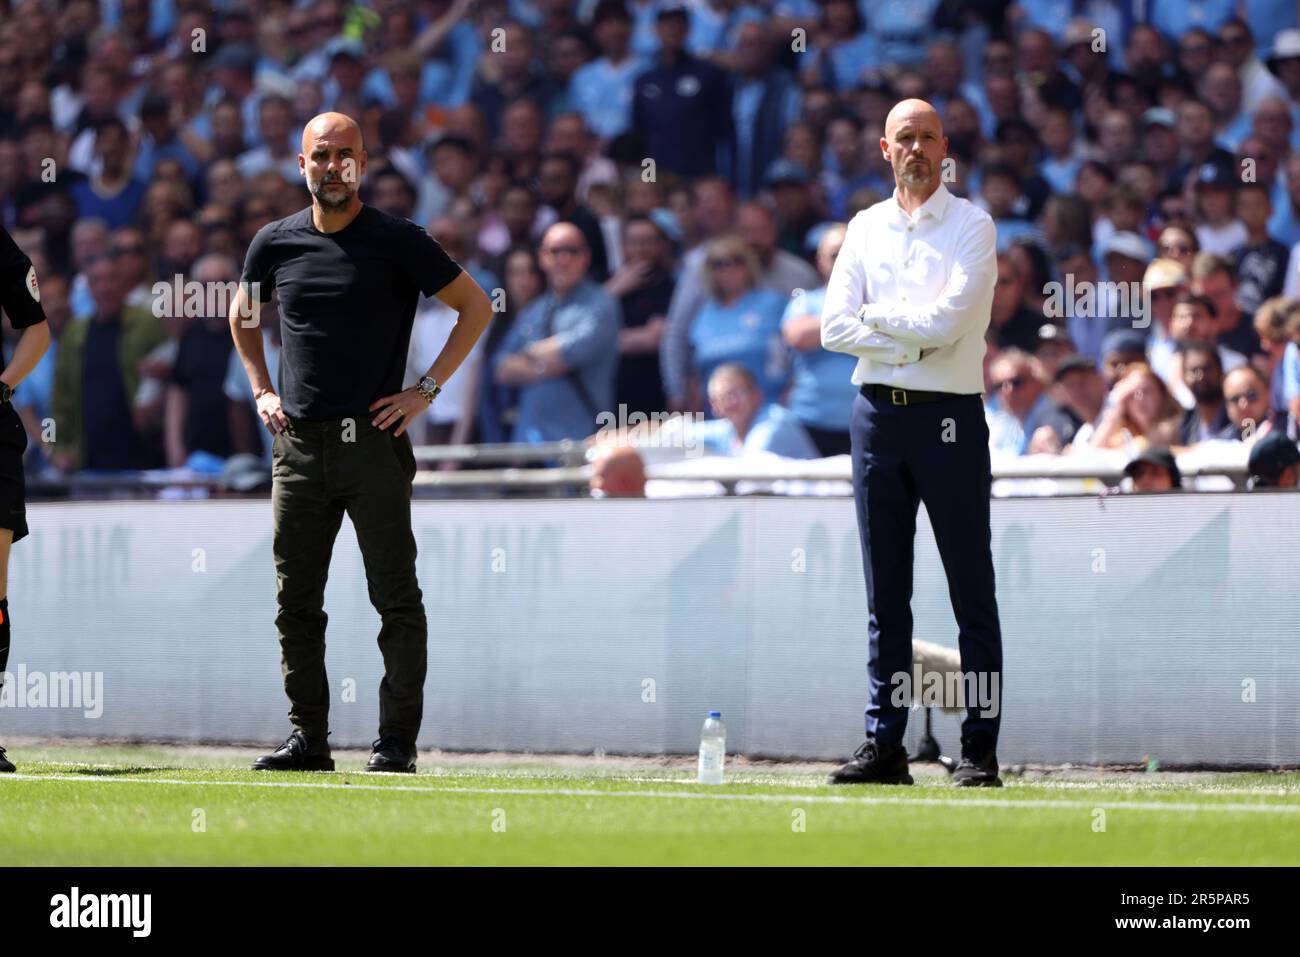 London, UK. 03rd June, 2023. Pep Guardiola (Man City manager) and Erik ten Hag (Man Utd manager) at the Emirates FA Cup Final Manchester City v Manchester United match at Wembley Stadium, London, UK on 3rd June, 2023. Credit: Paul Marriott/Alamy Live News Stock Photo